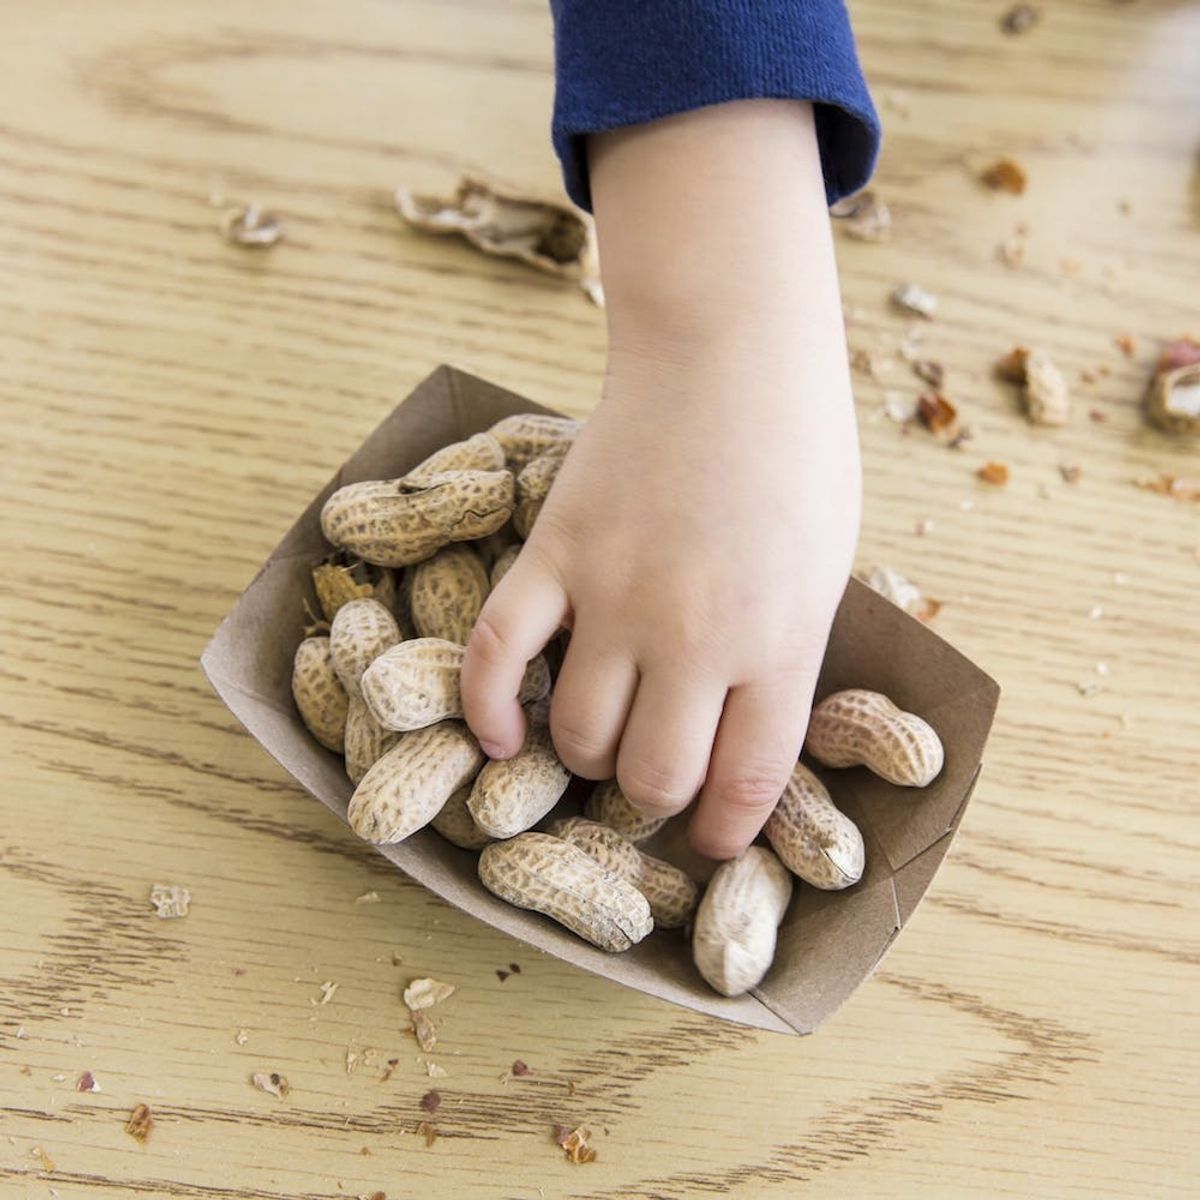 This Tiny Skin Patch Might Cure Peanut Allergies